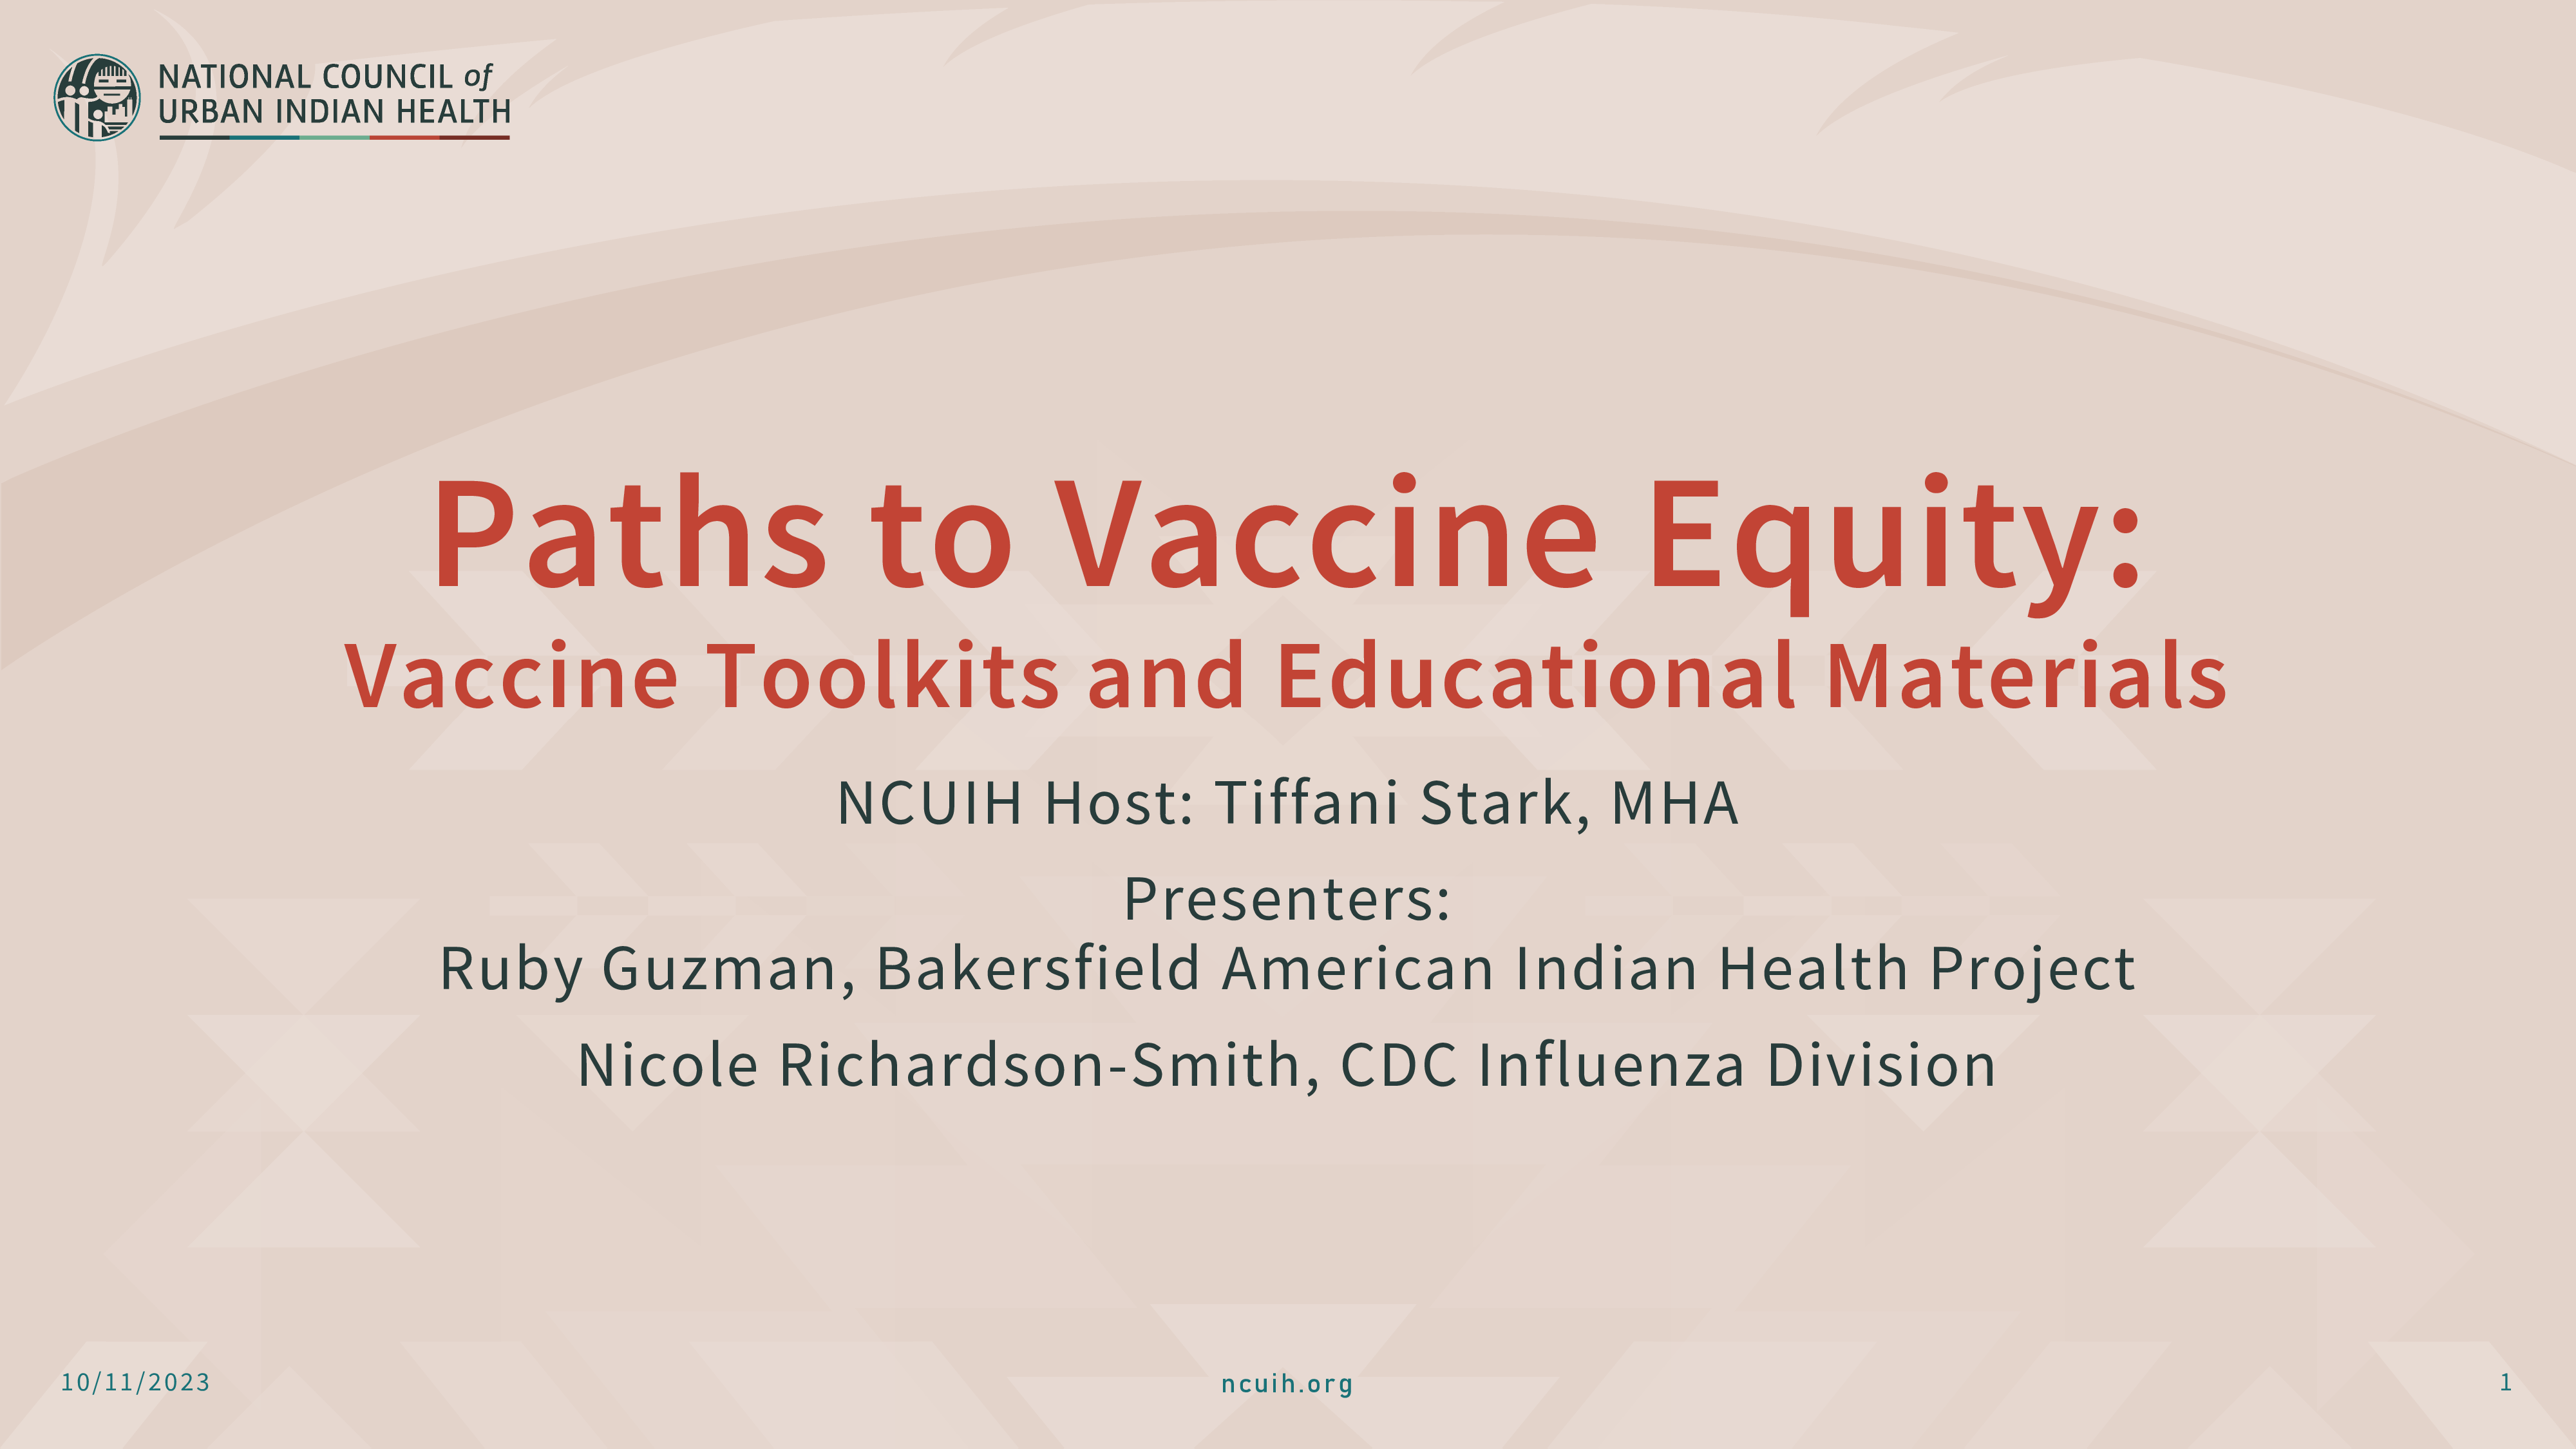 Opening PowerPoint slide reads 'paths to vaccine equity'